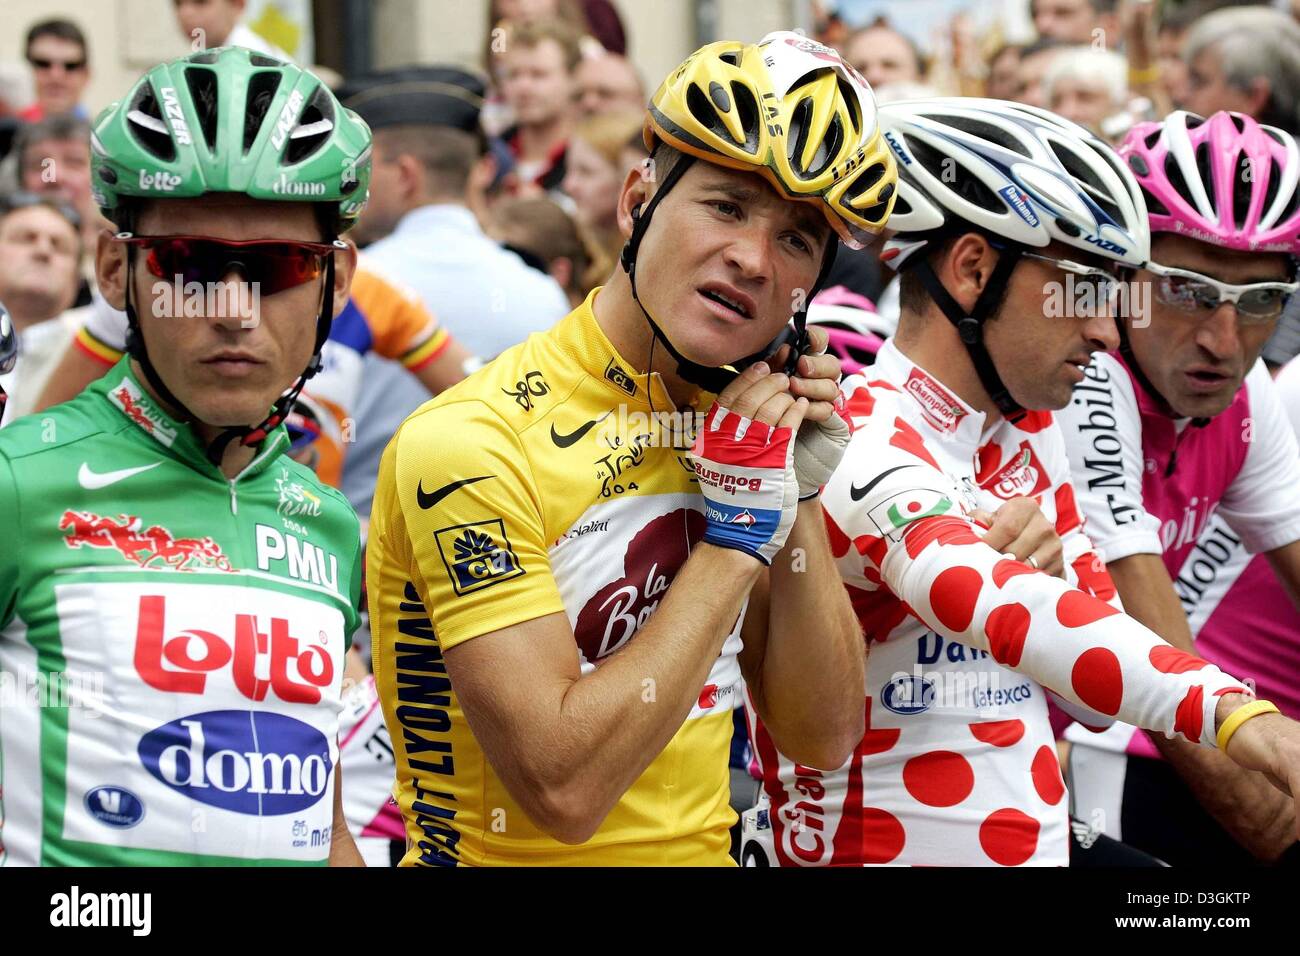 (dpa) - Australian cyclist Robbie McEwen (L-R) of team Lotto-Domo, wearing the green jersey of the best sprinter, French cyclist Thomas Voeckler of team Brioches La Boulangere, wearing the yellow jersey of the best overall leader, and Italian cyclist Paolo Bettini, wearing the polka-dotted jersey of the best climber, await the start of the 9th stage of the Tour de France cycling ra Stock Photo